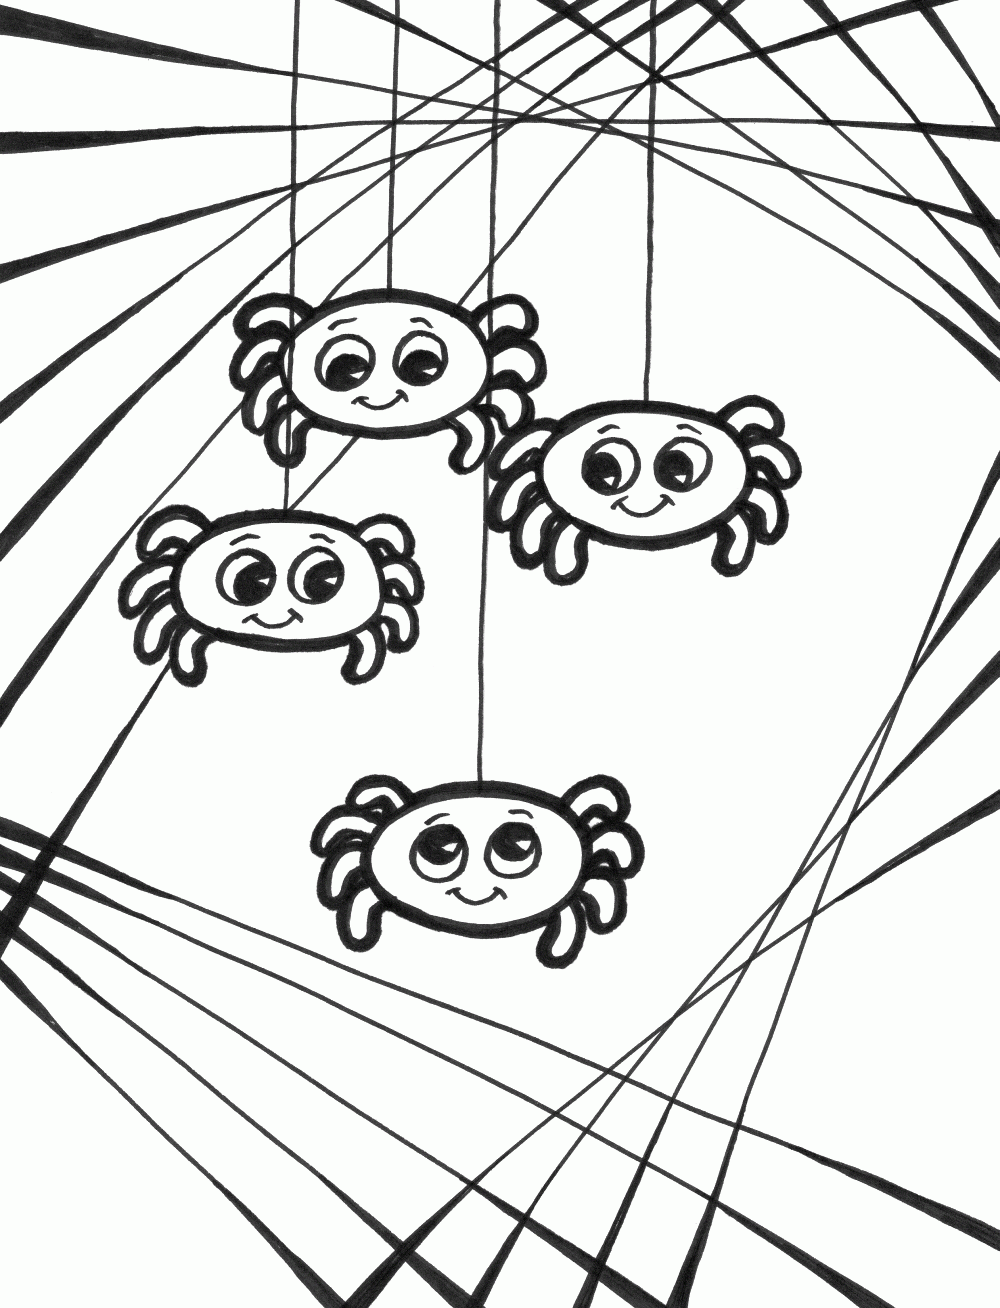 Scary Spider Coloring Pages - Coloring Home